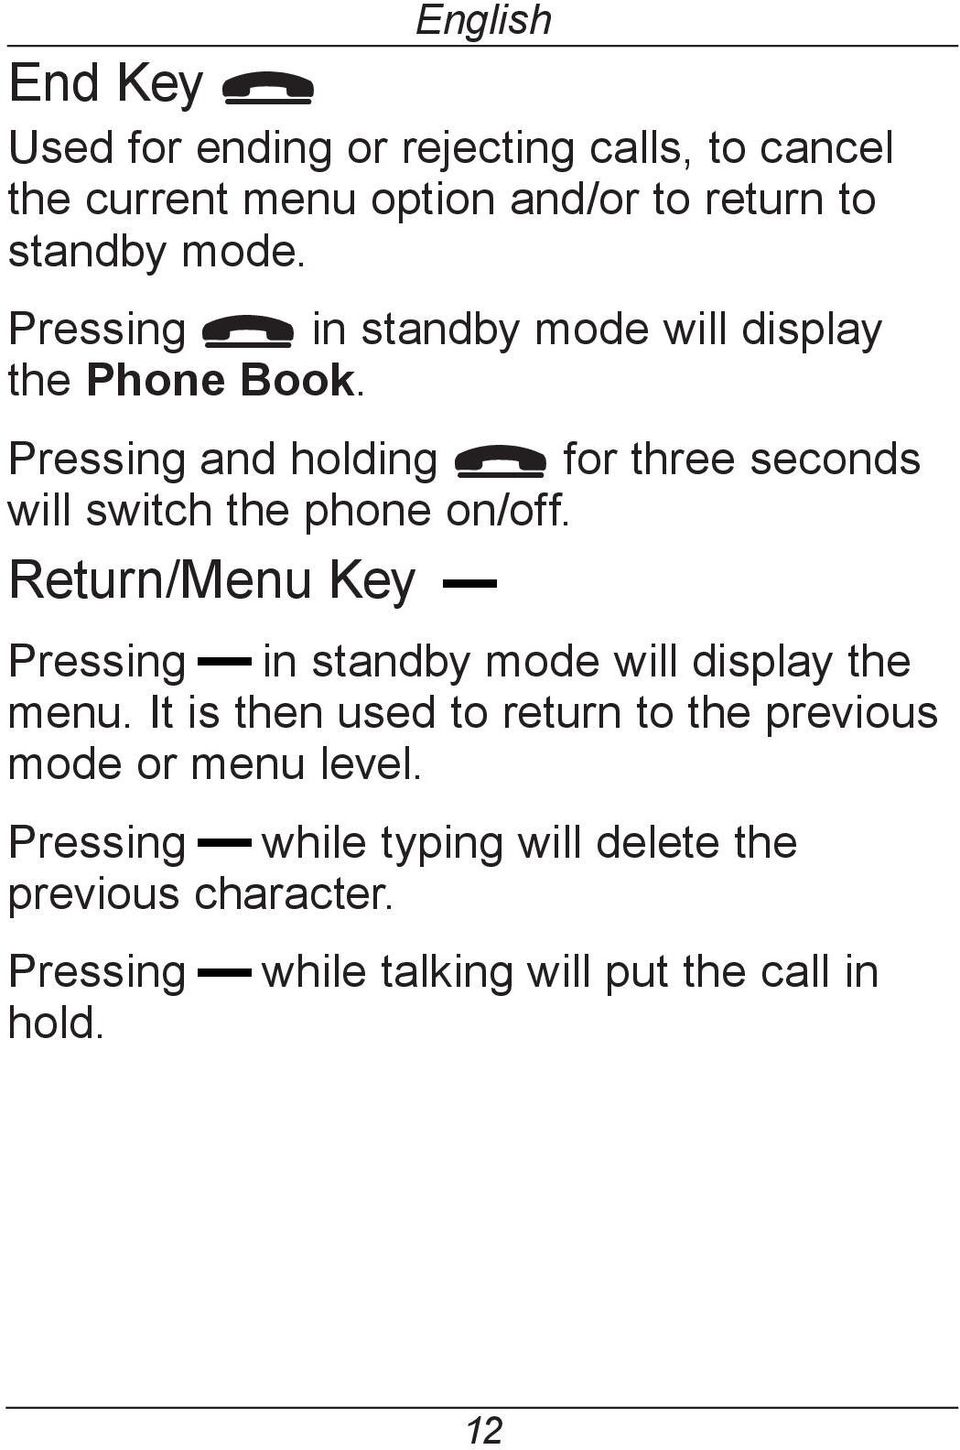 Pressing and holding L for three seconds will switch the phone on/off.